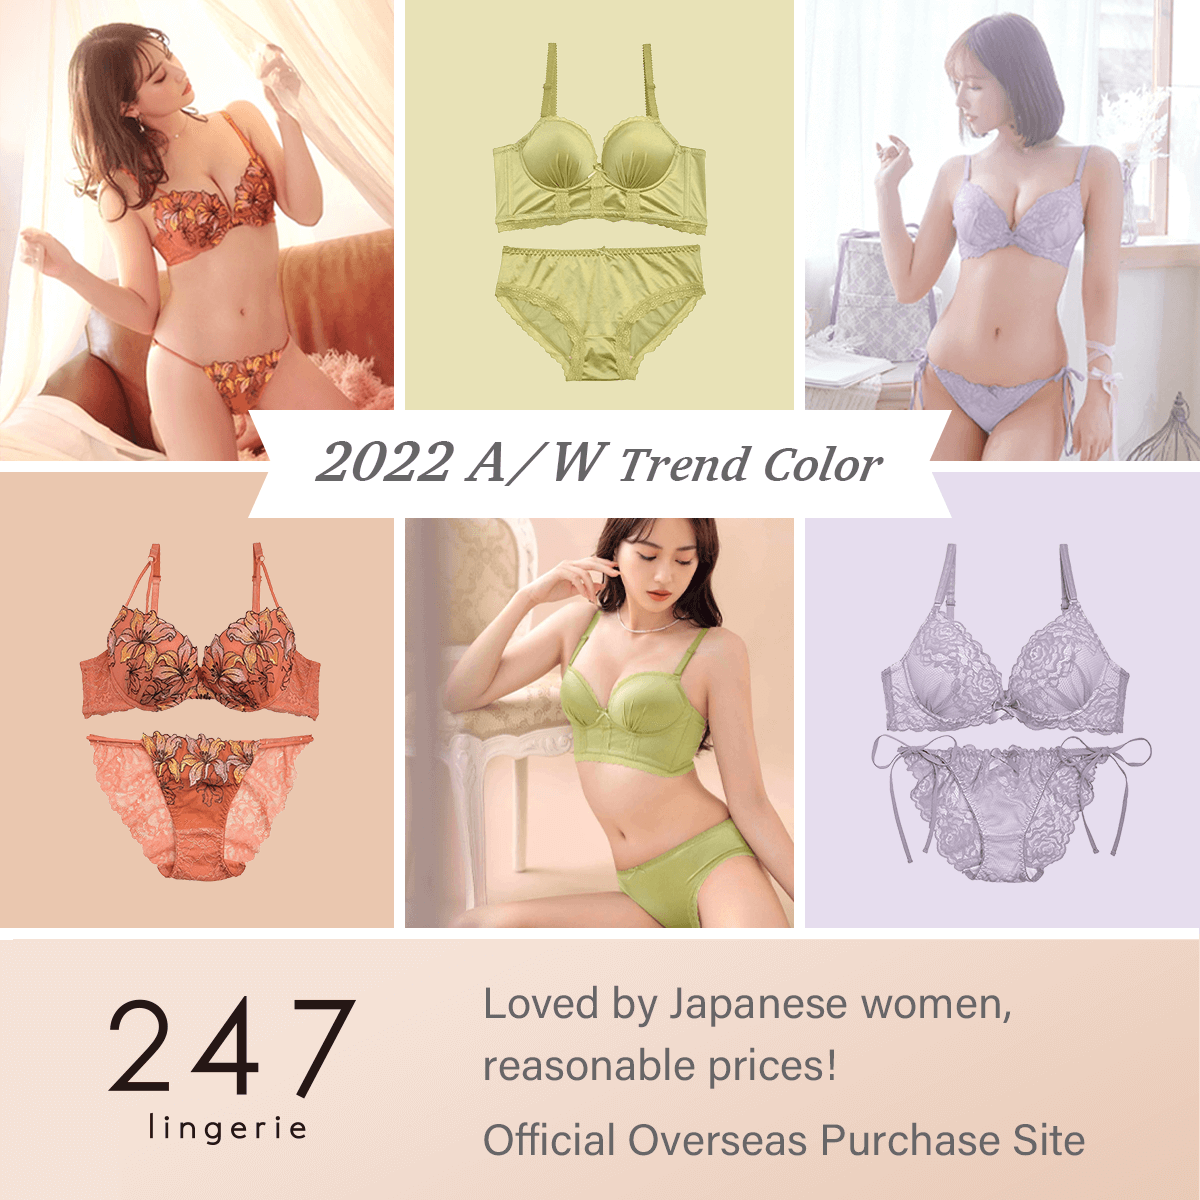 11 Recommended Japanese Lingerie Brands to Buy in Japan